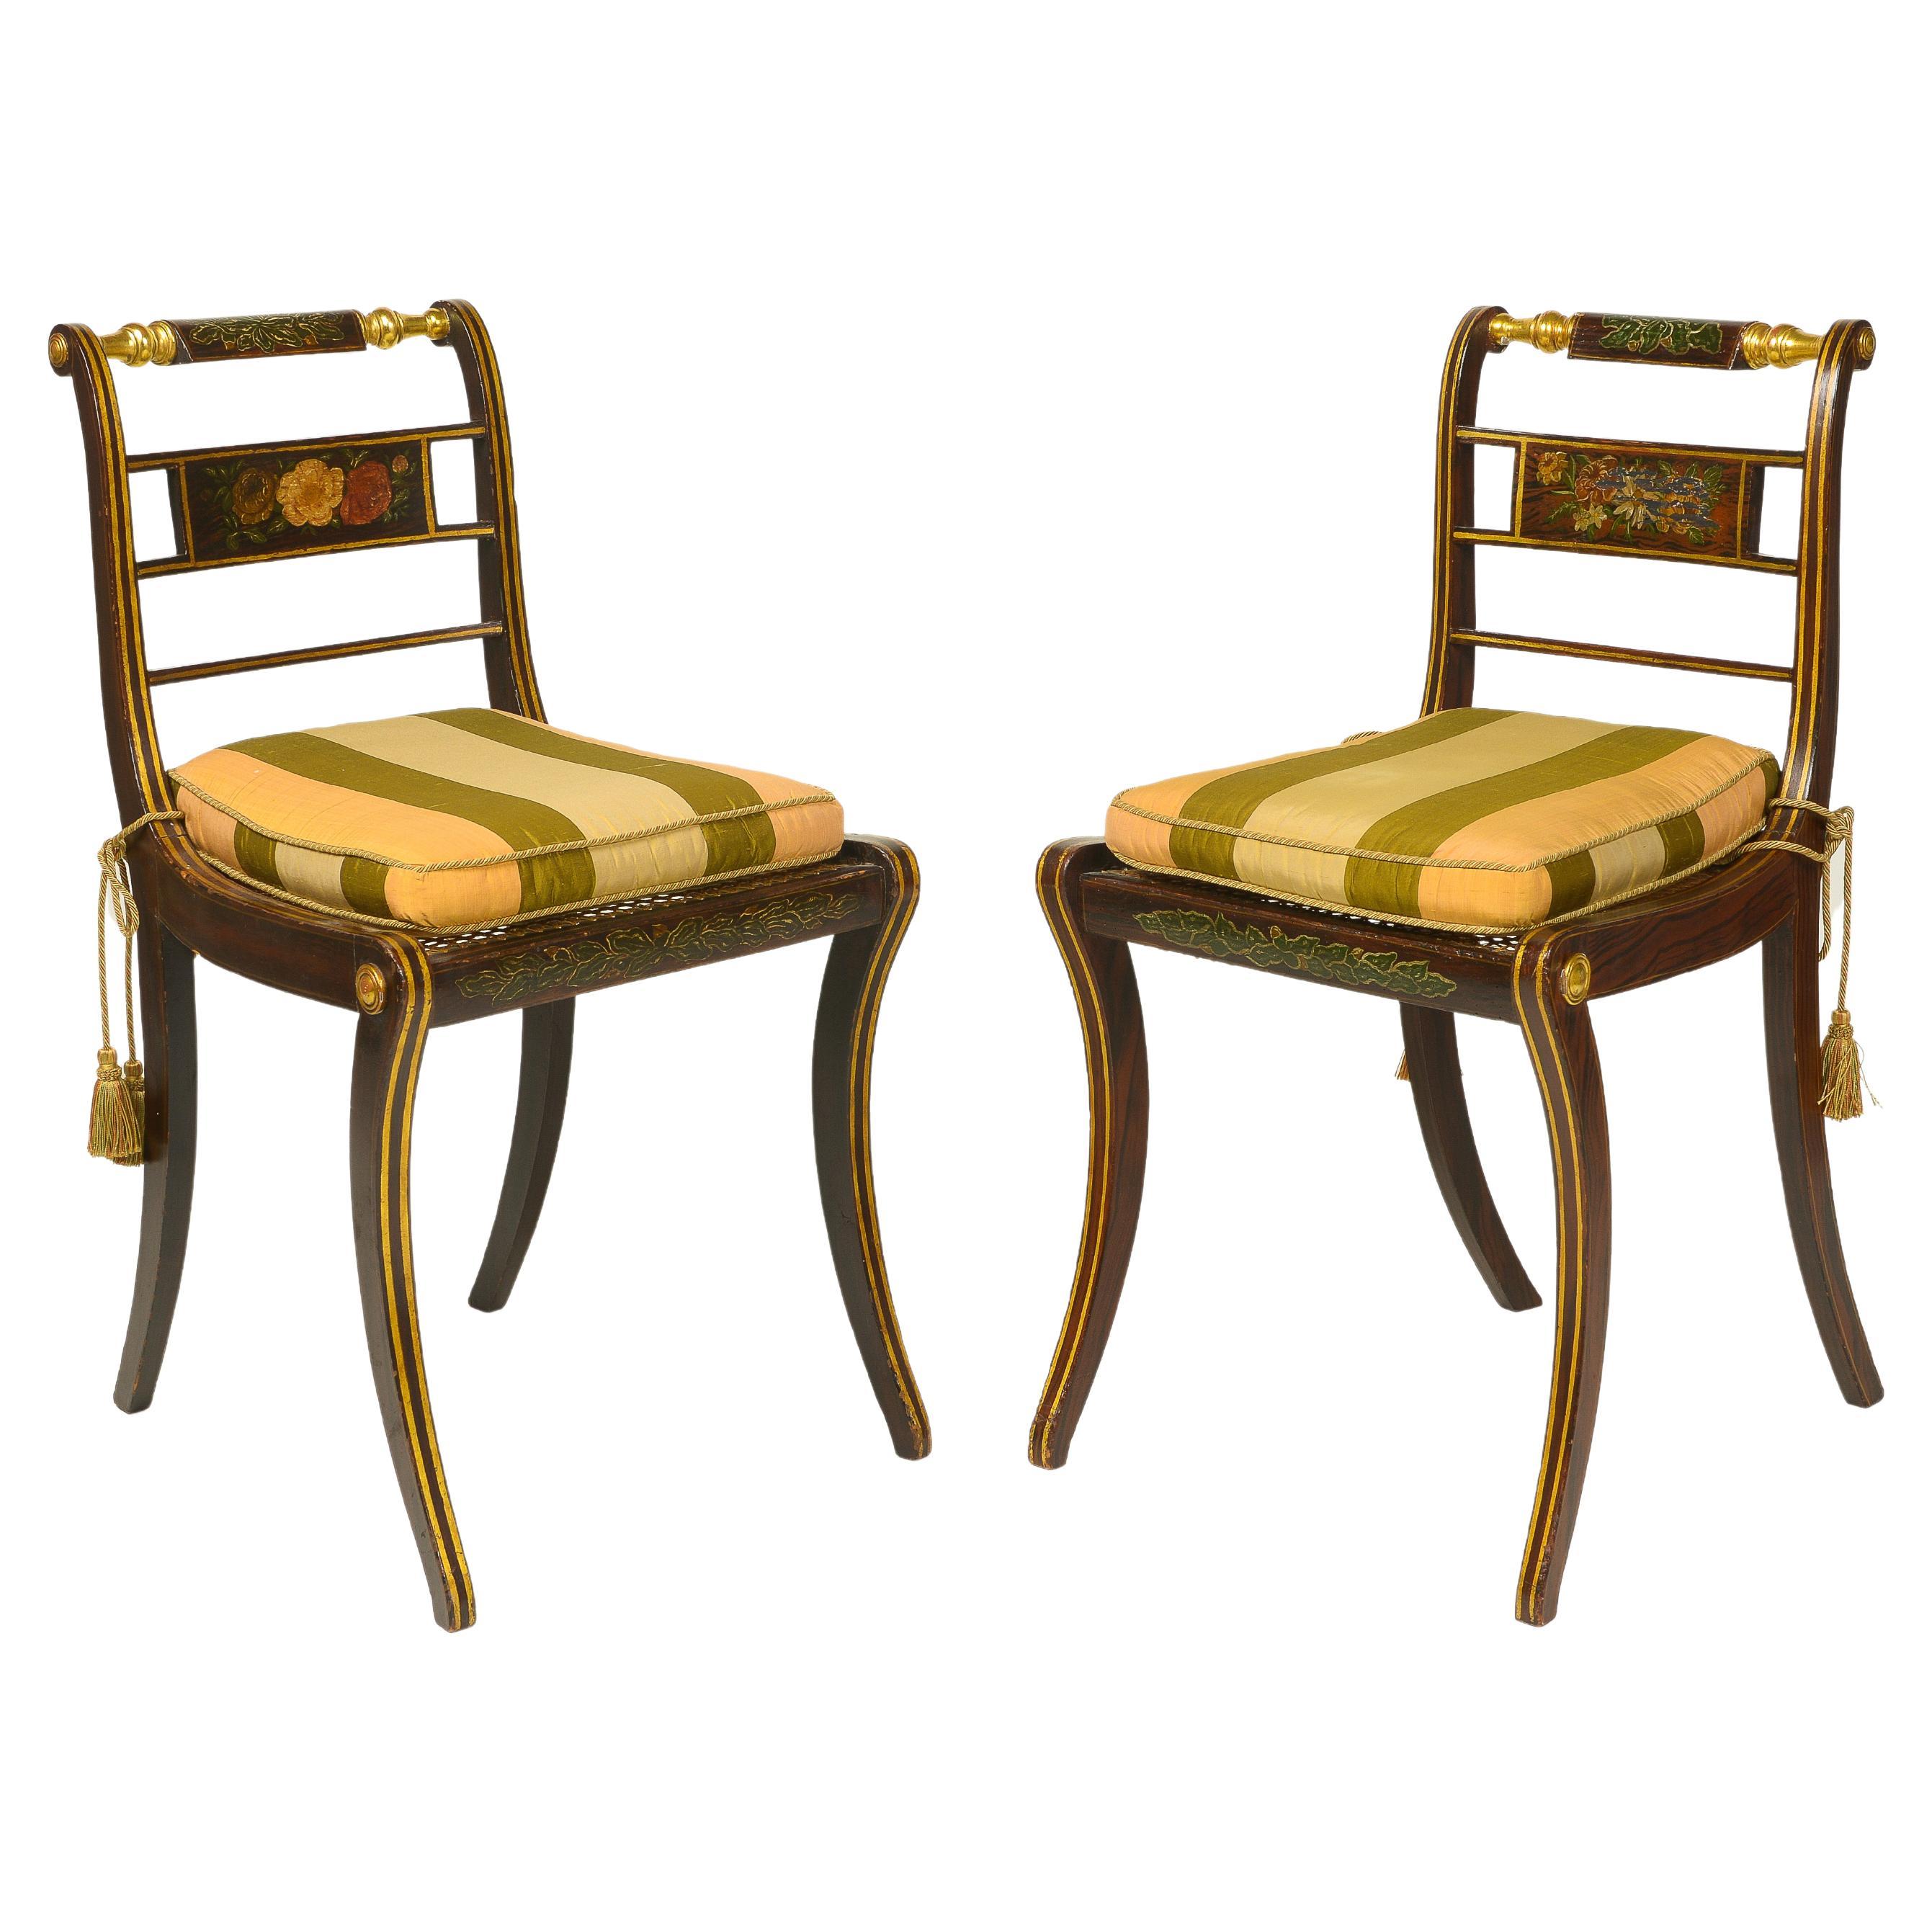 Pair of Regency Grained and Gilt Side Chairs